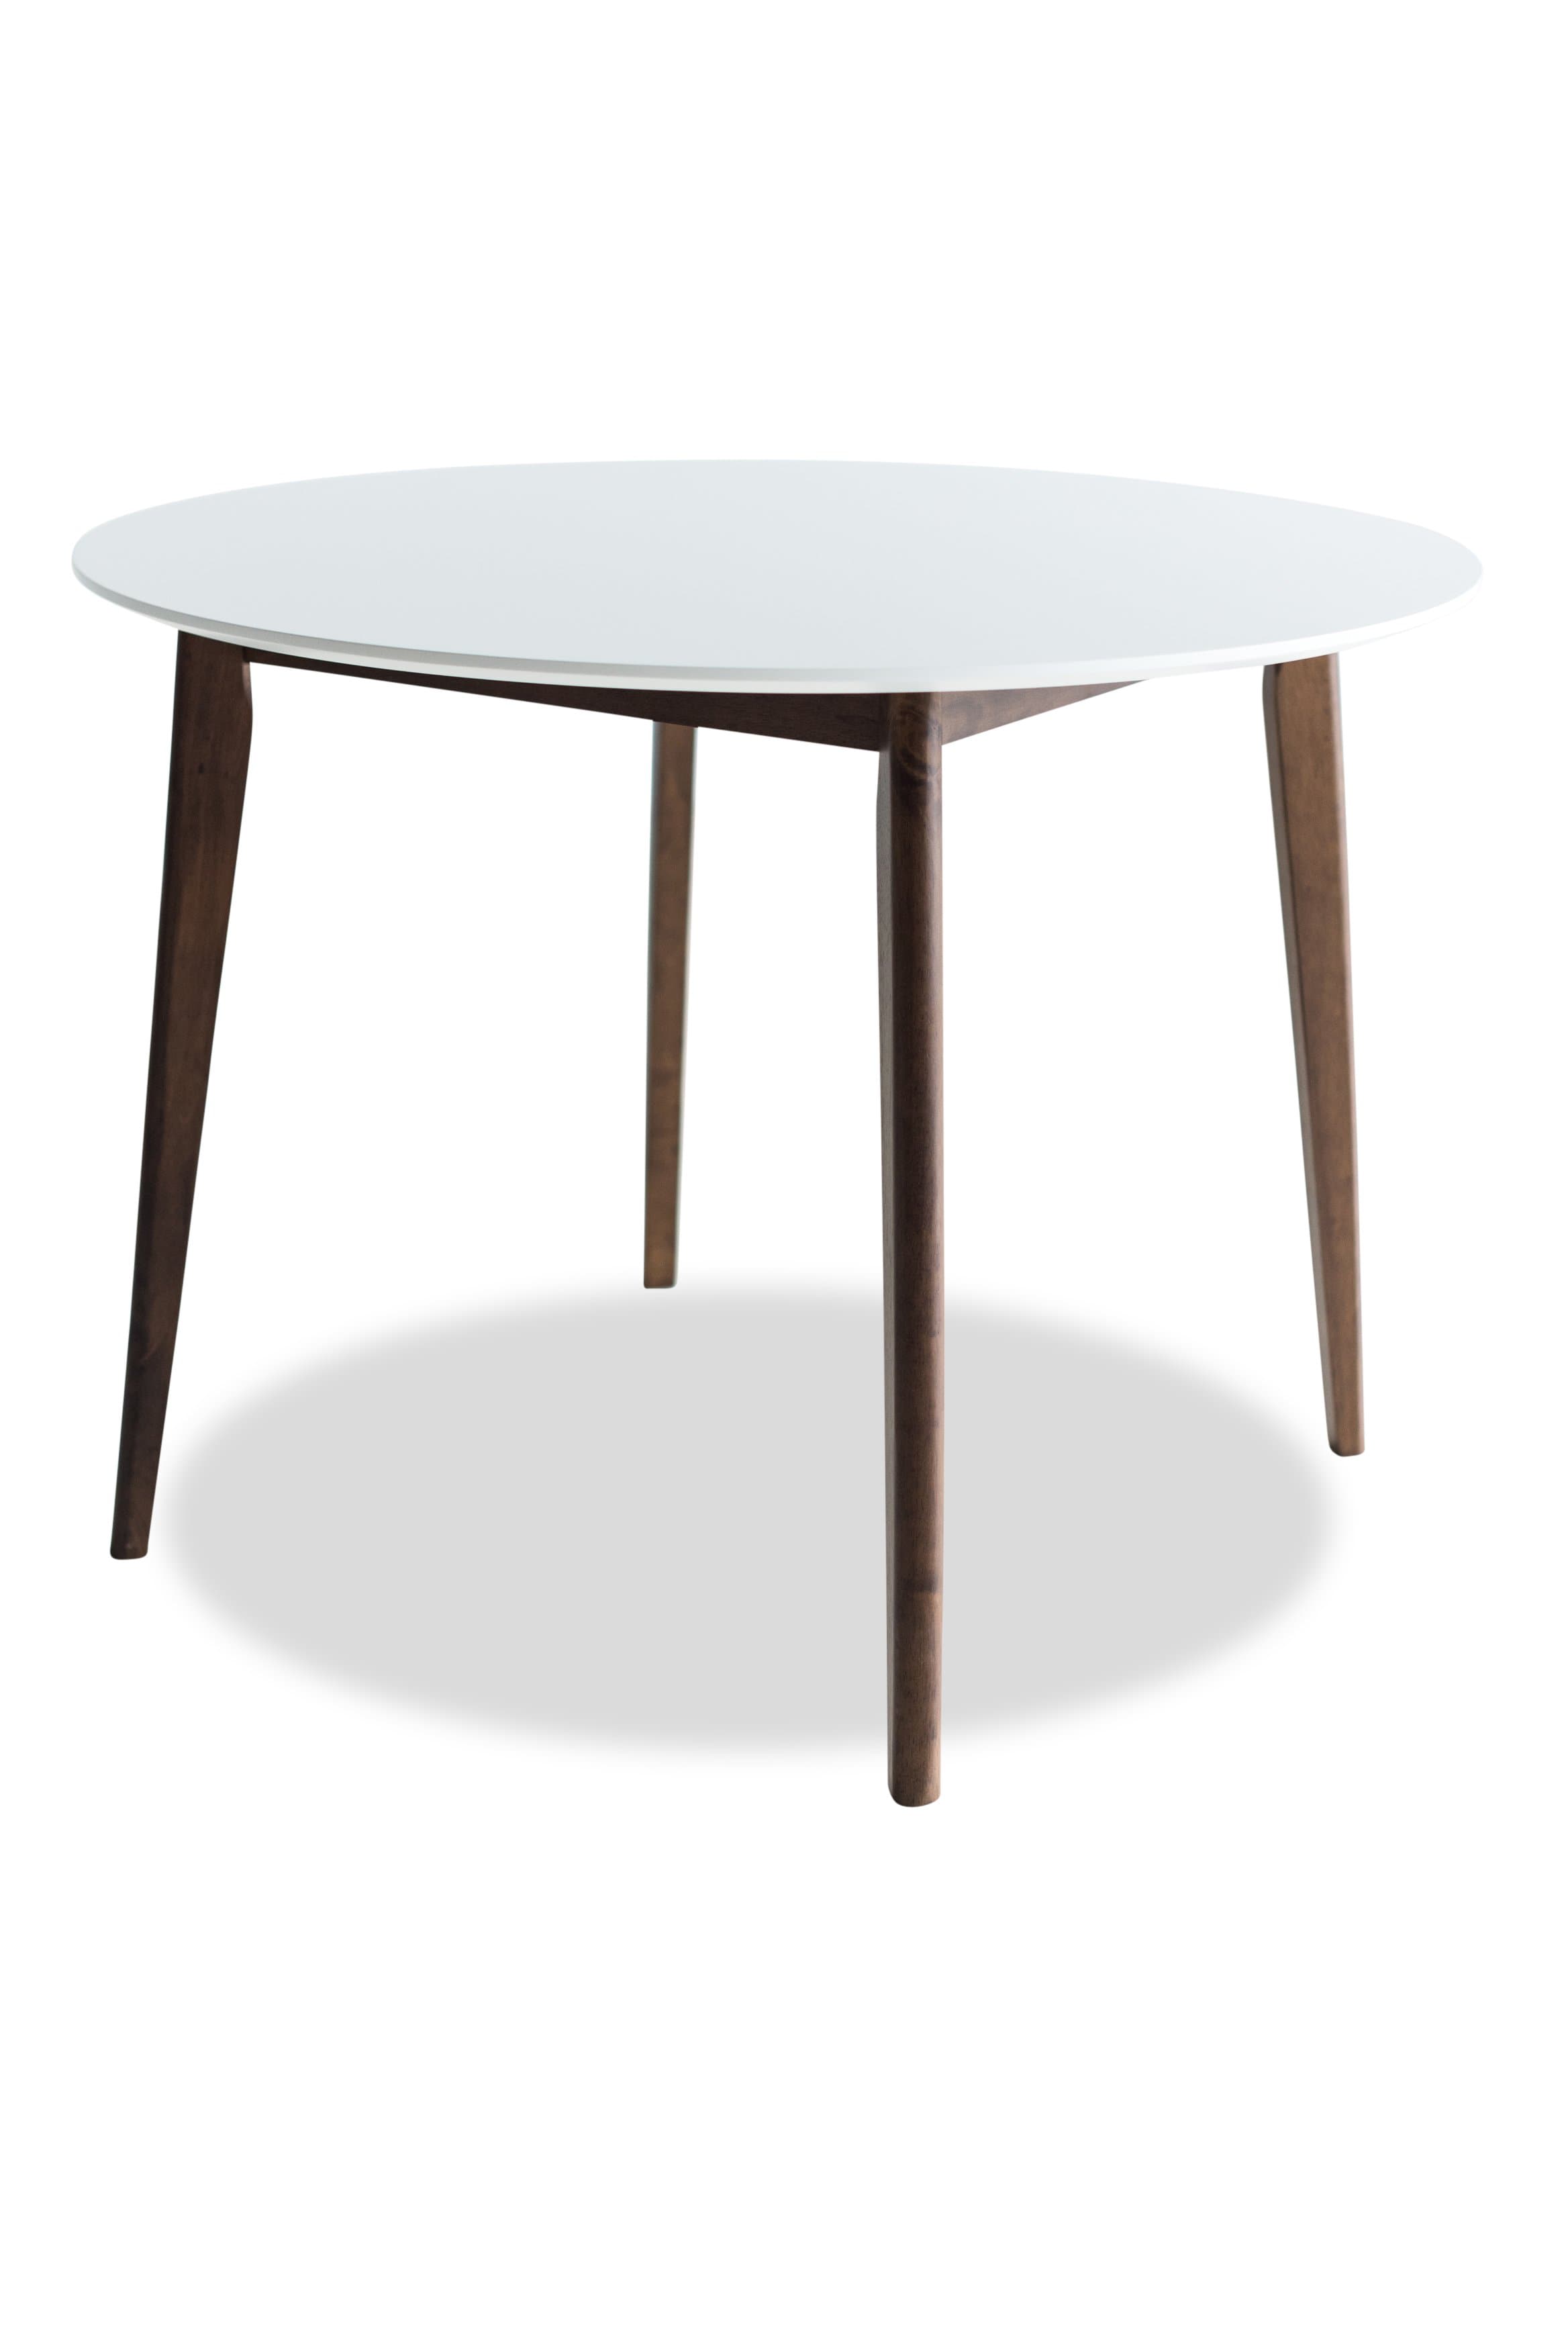 Alia Mid Century Modern Round Dining Table Small Kitchen Table White Edloe Finch Furniture Co